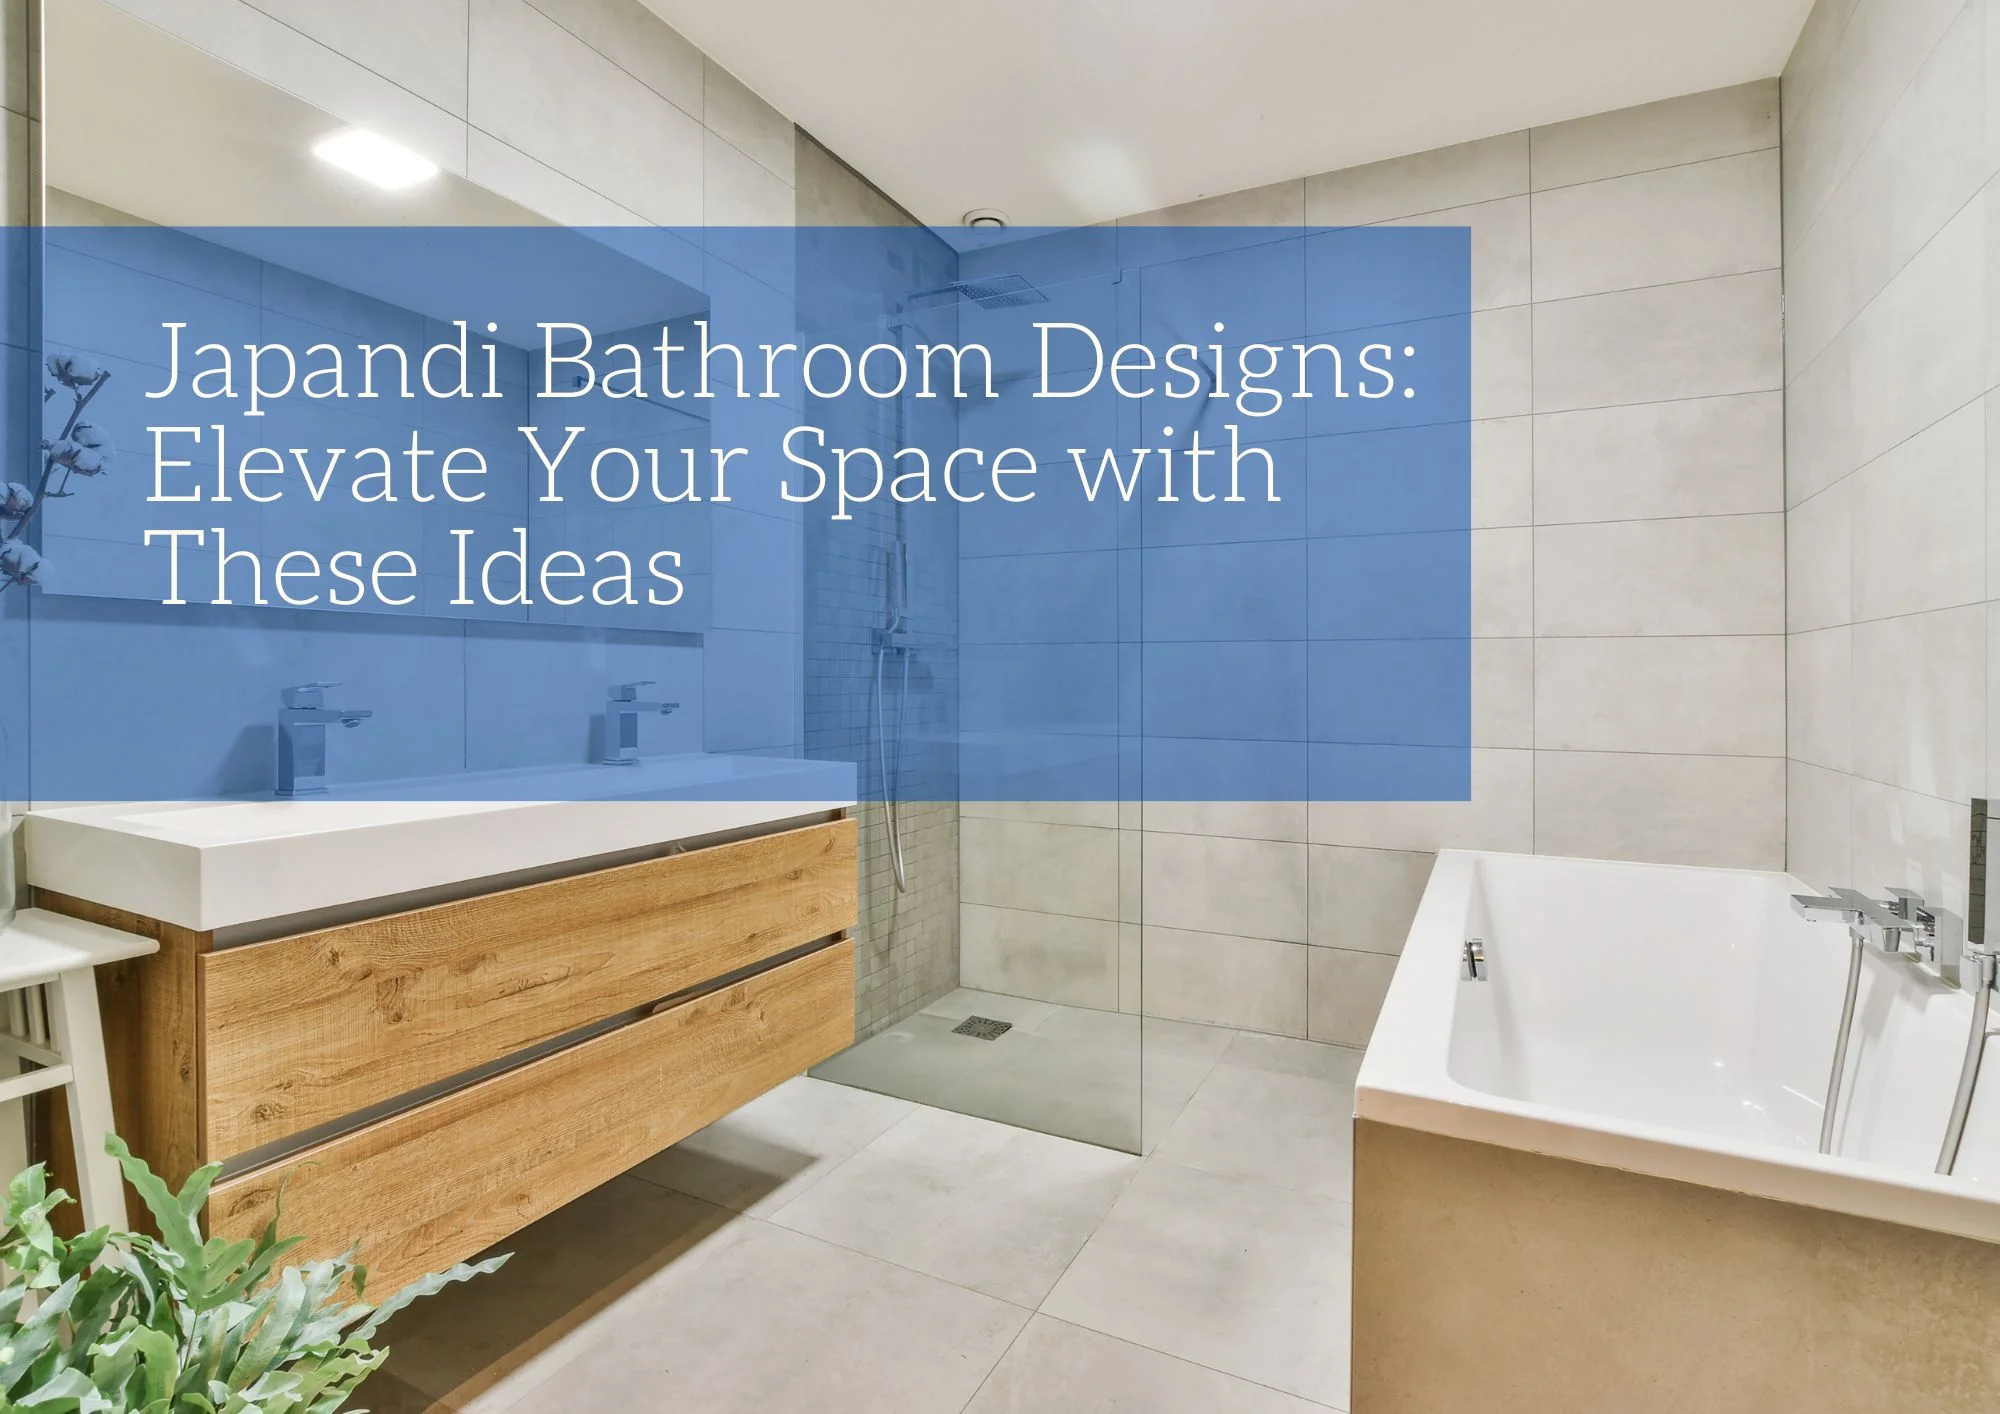 Japandi Bathroom Designs: Elevate Your Space with These Ideas